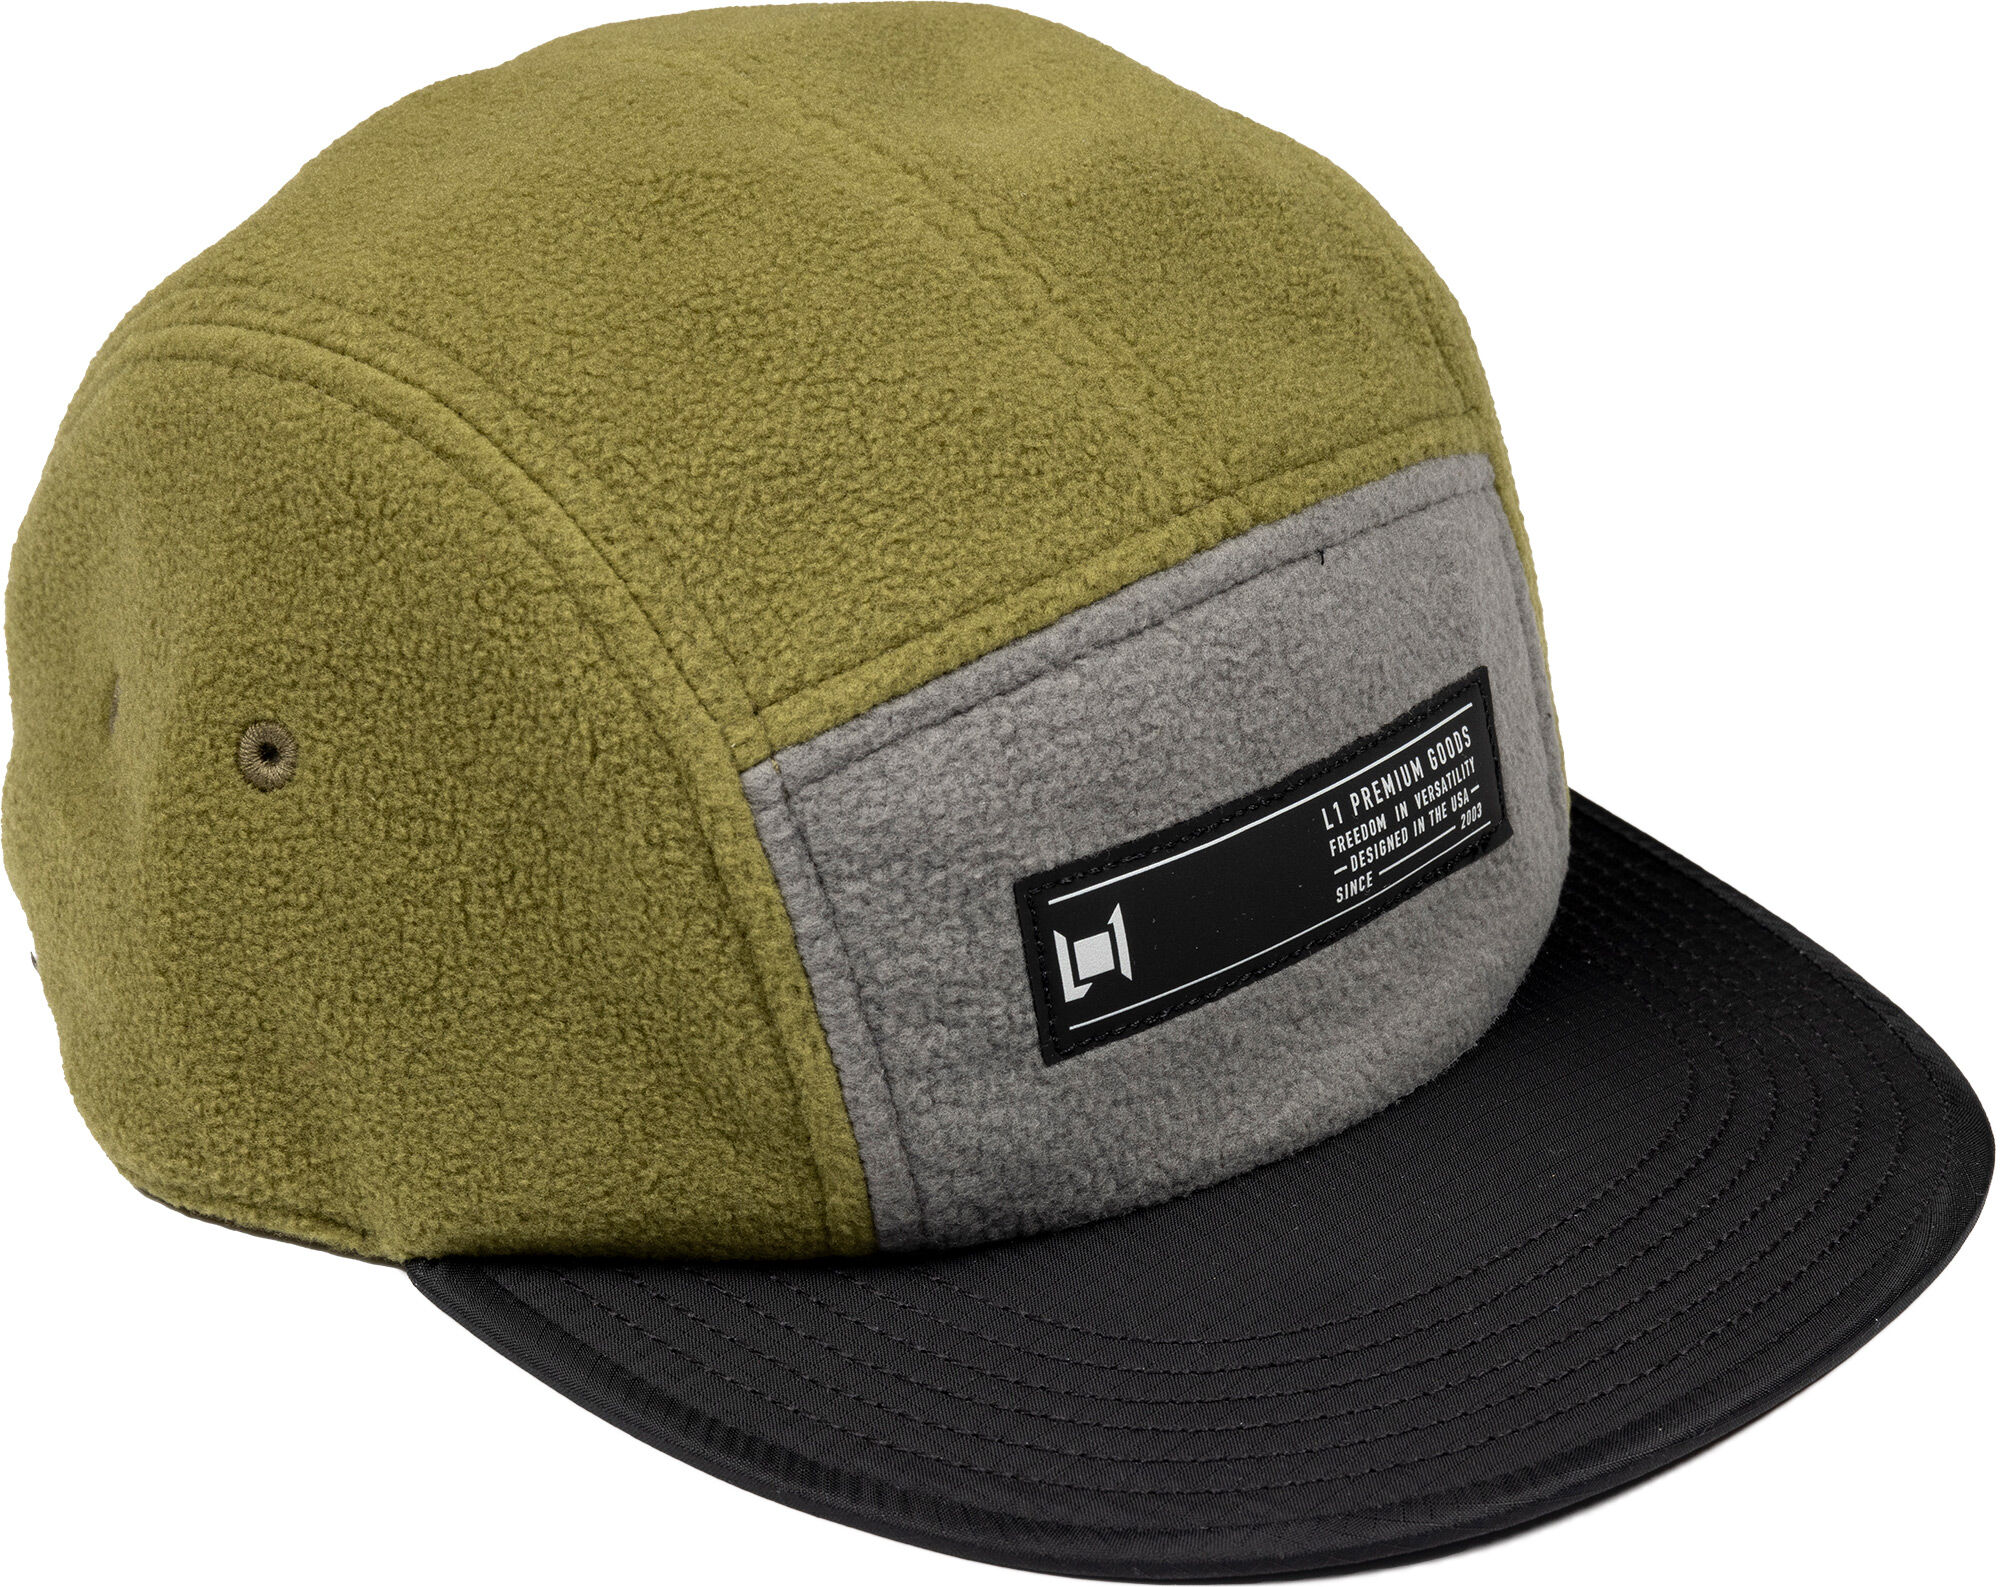 L1 NITRO PITTED CAP GOLDEN MOSS One Size